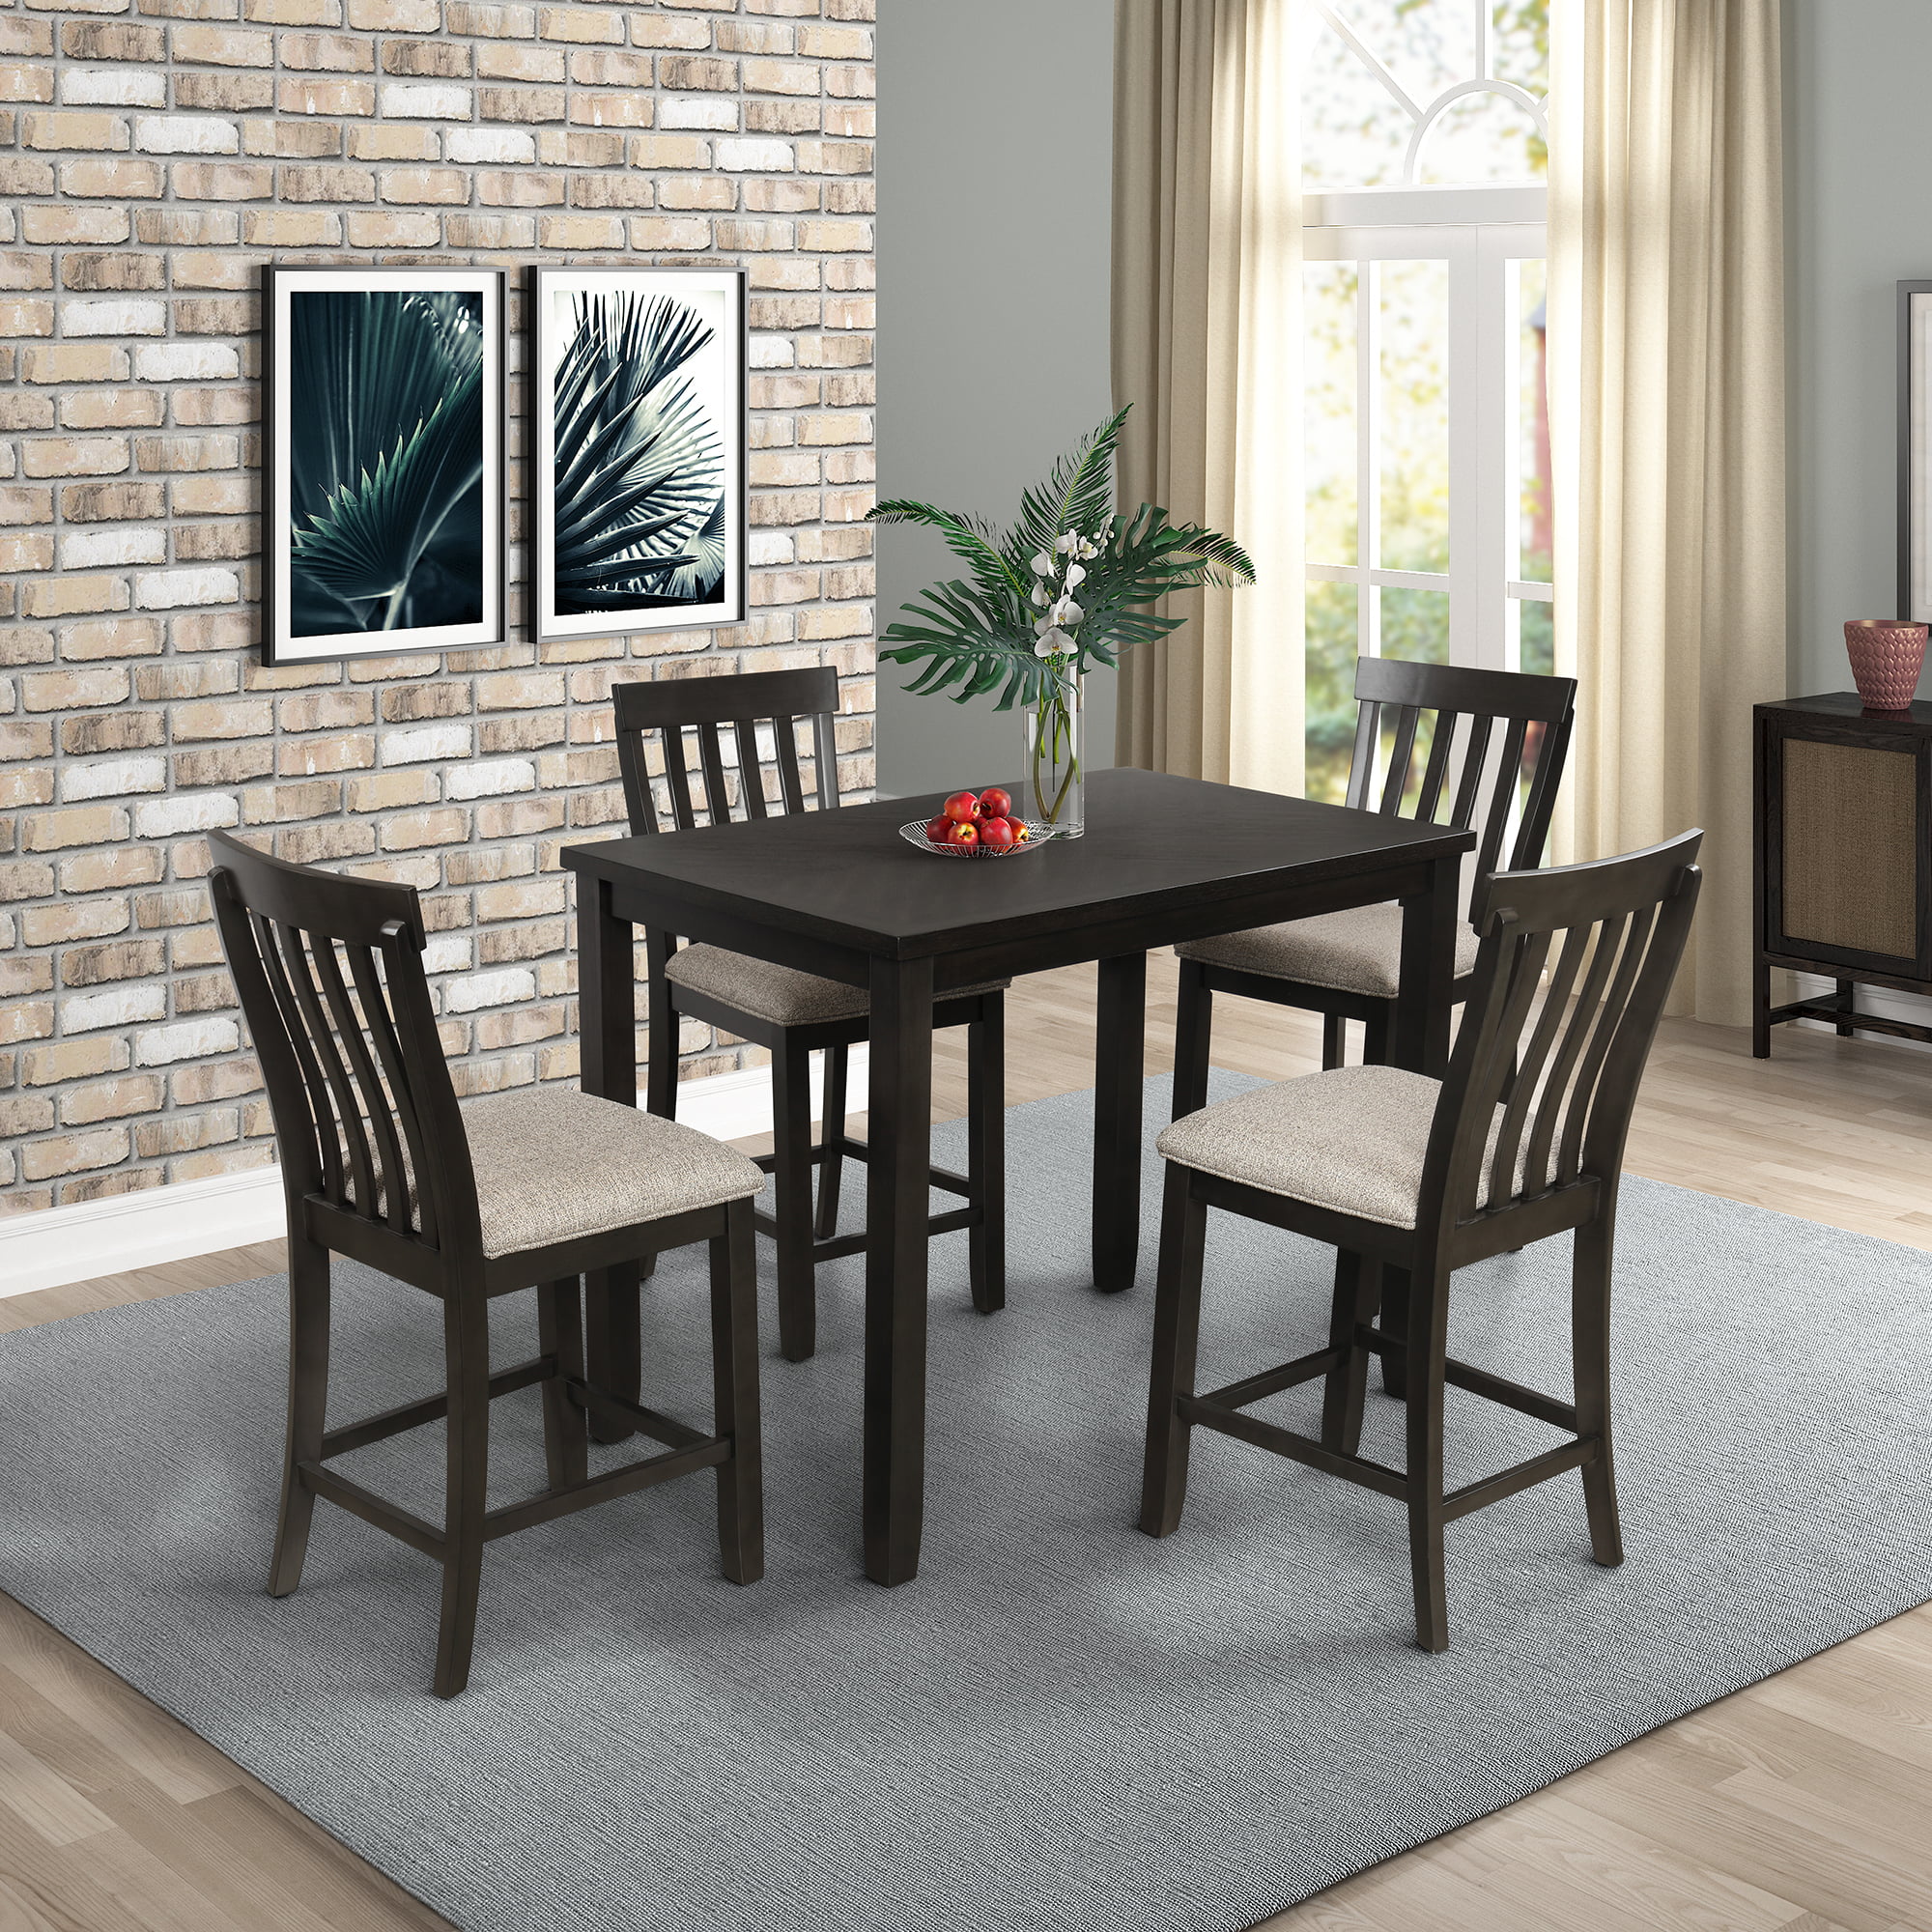 Dining Table Set with 4 Chairs, 5-Piece Wooden Kitchen Table Set